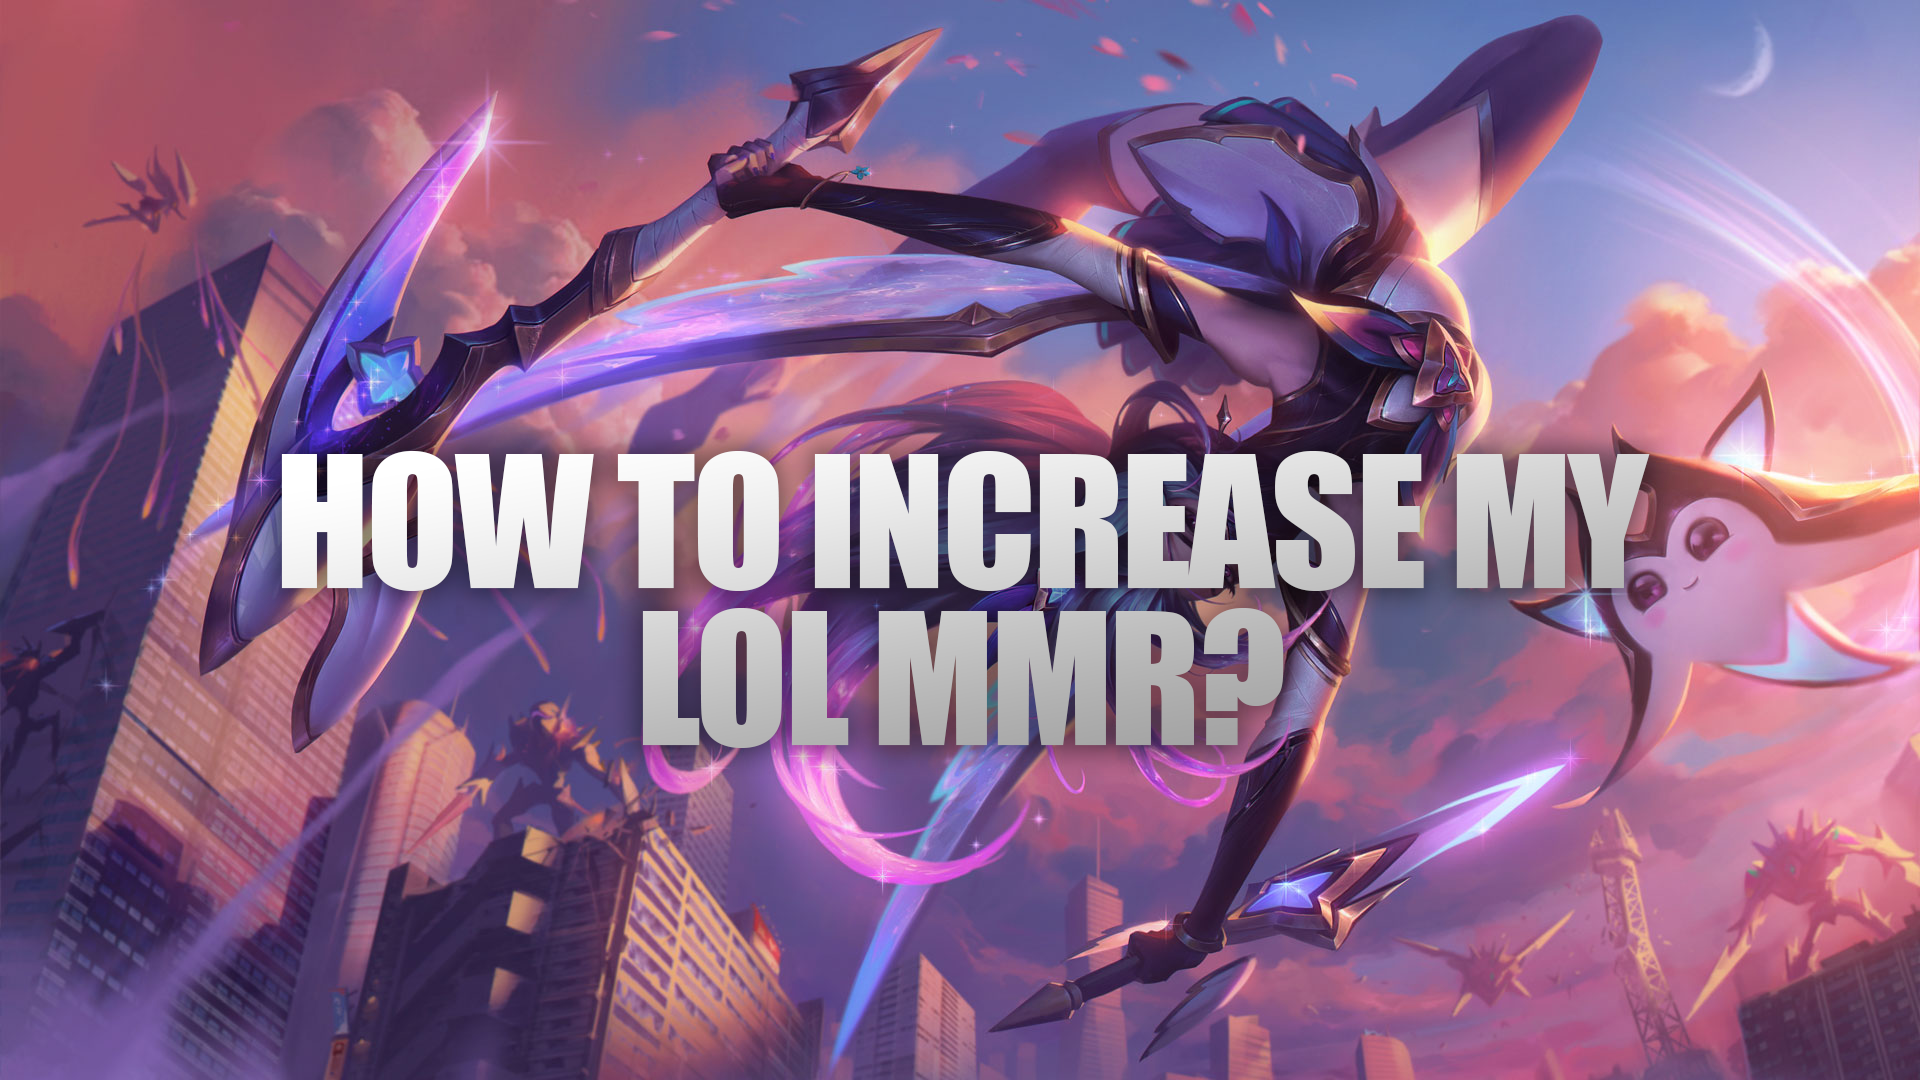 Many League of Legends players want to know - how can I increase my MMR? There are two primary methods to raise your Matchmaking Rating over time.